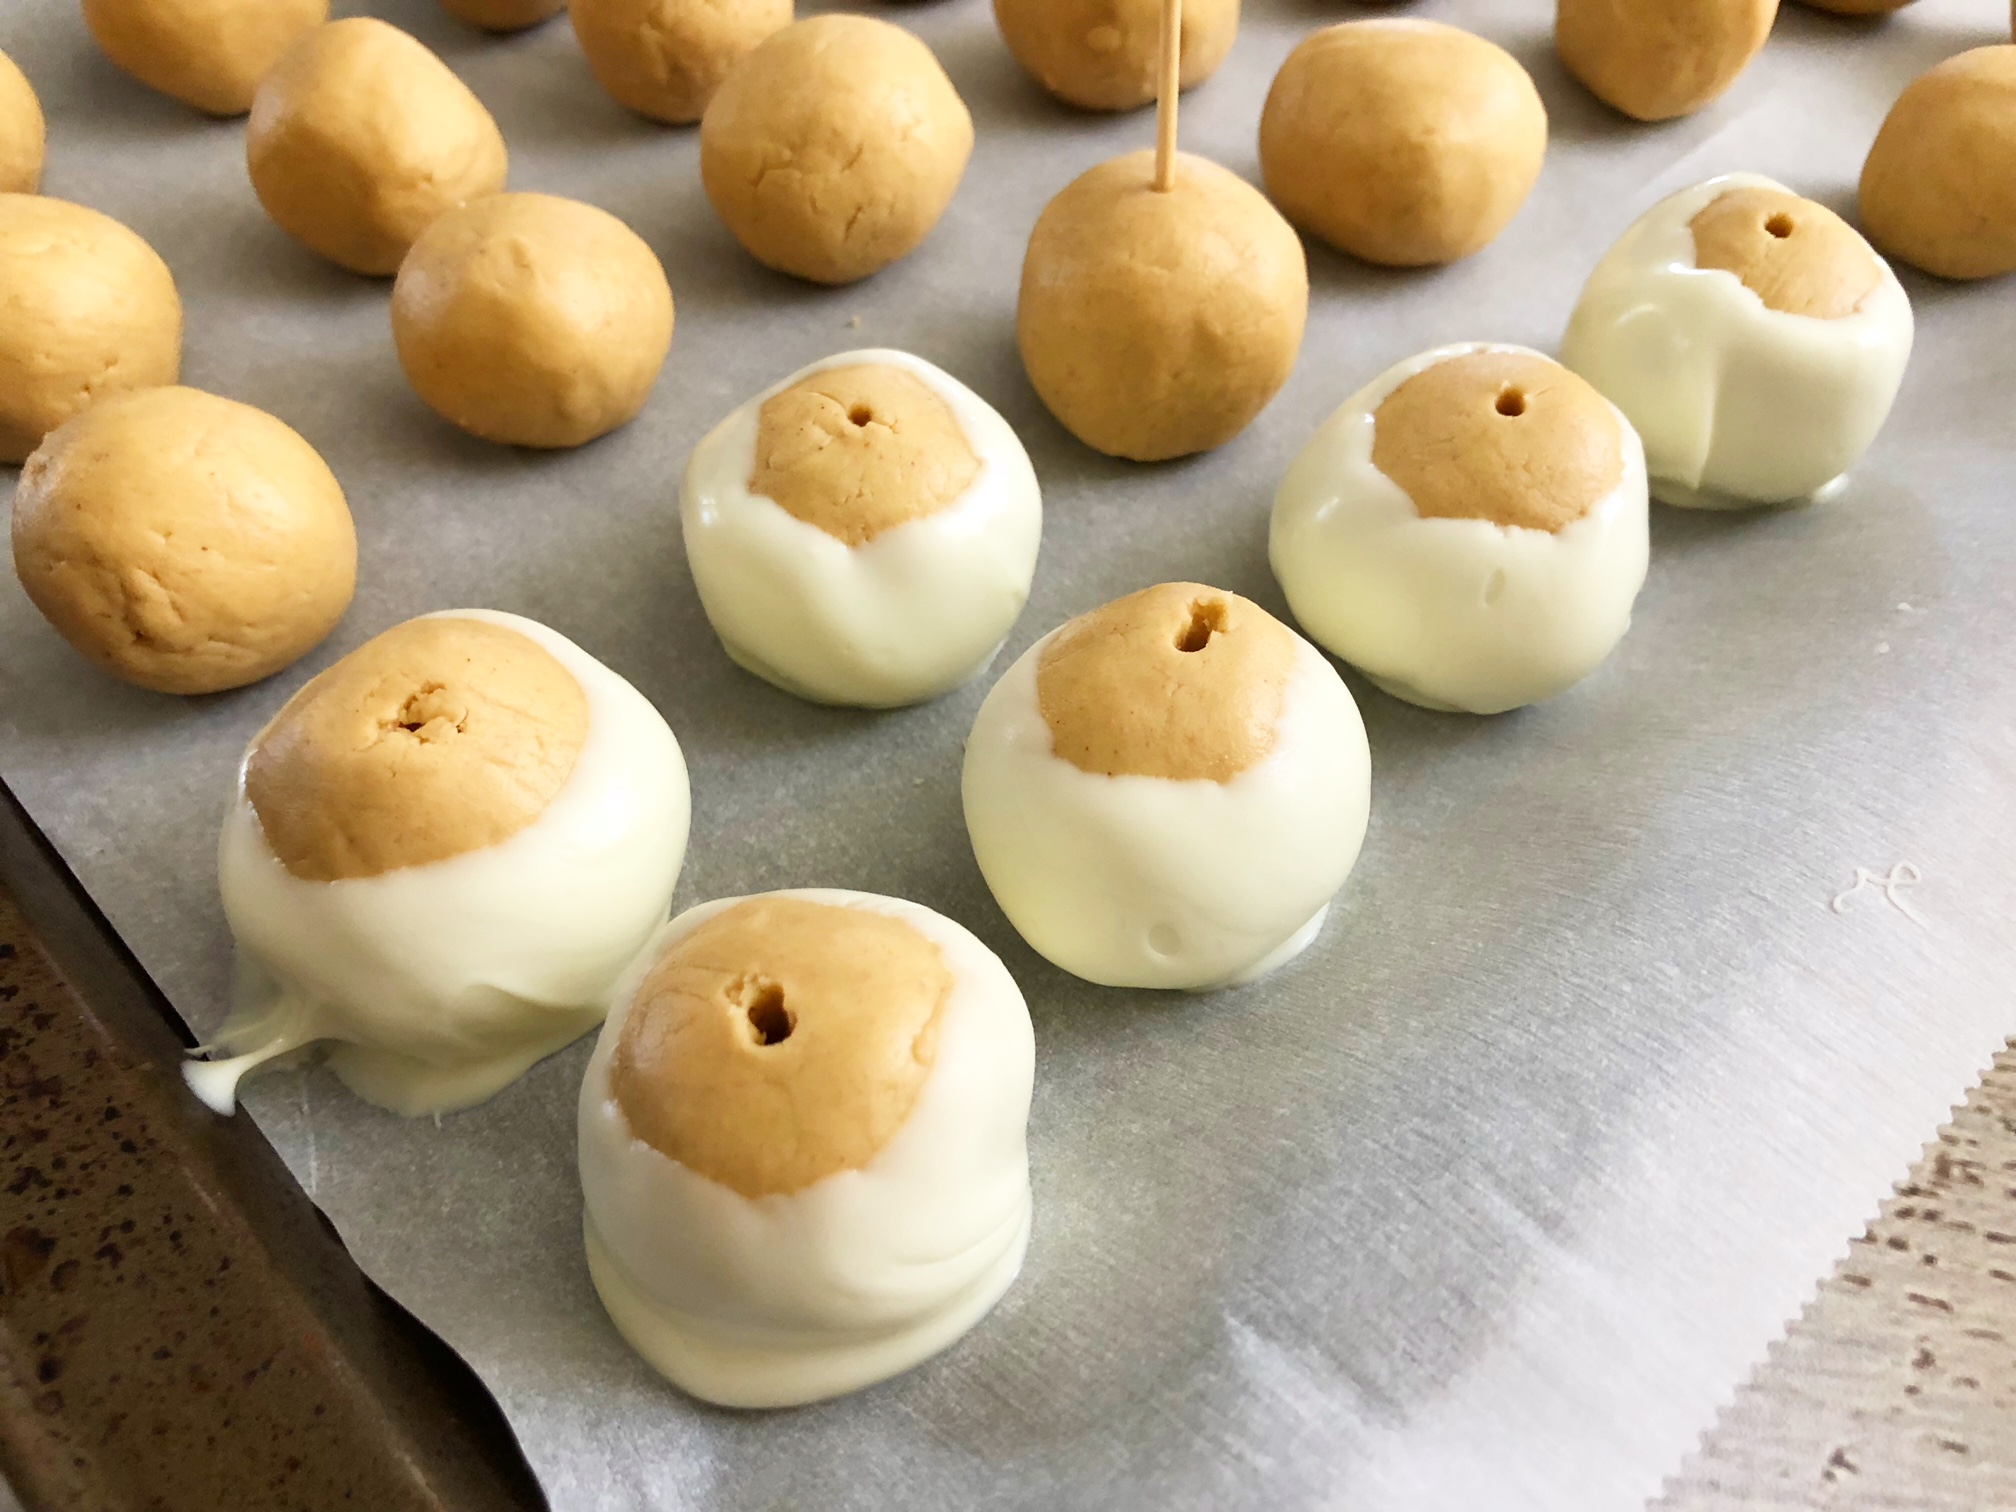 Let the white chocolate set on the balls before decorating